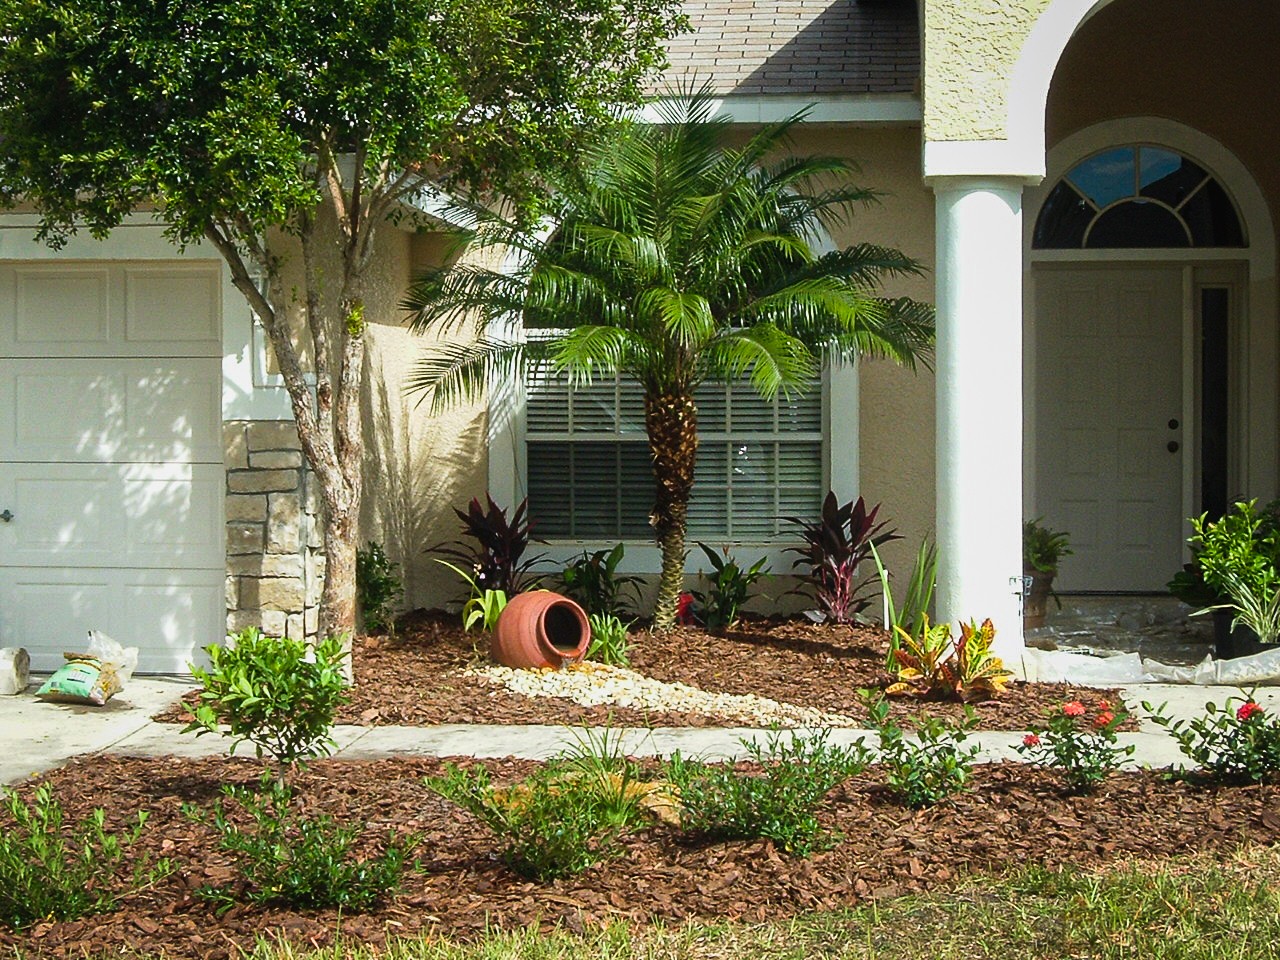 front yard landscapingwith garden beds, water fountain and natural rock near front door entry way